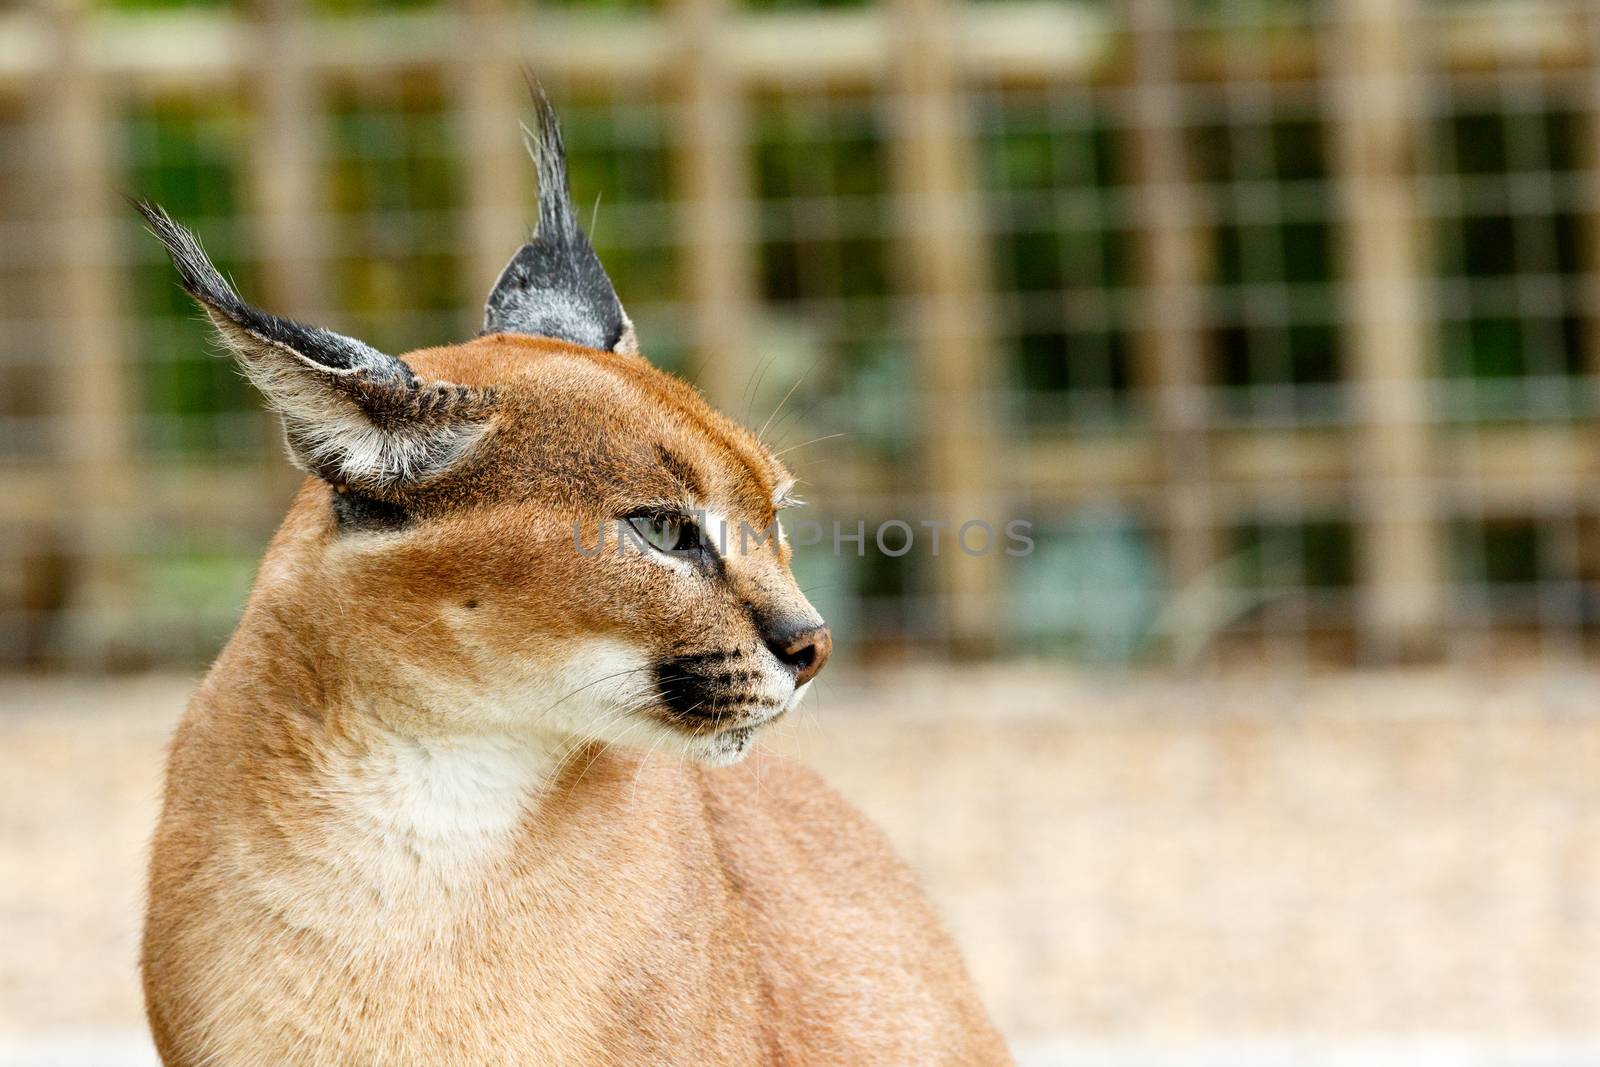 Rooikat caracal wild cat standing and staring in a distance.